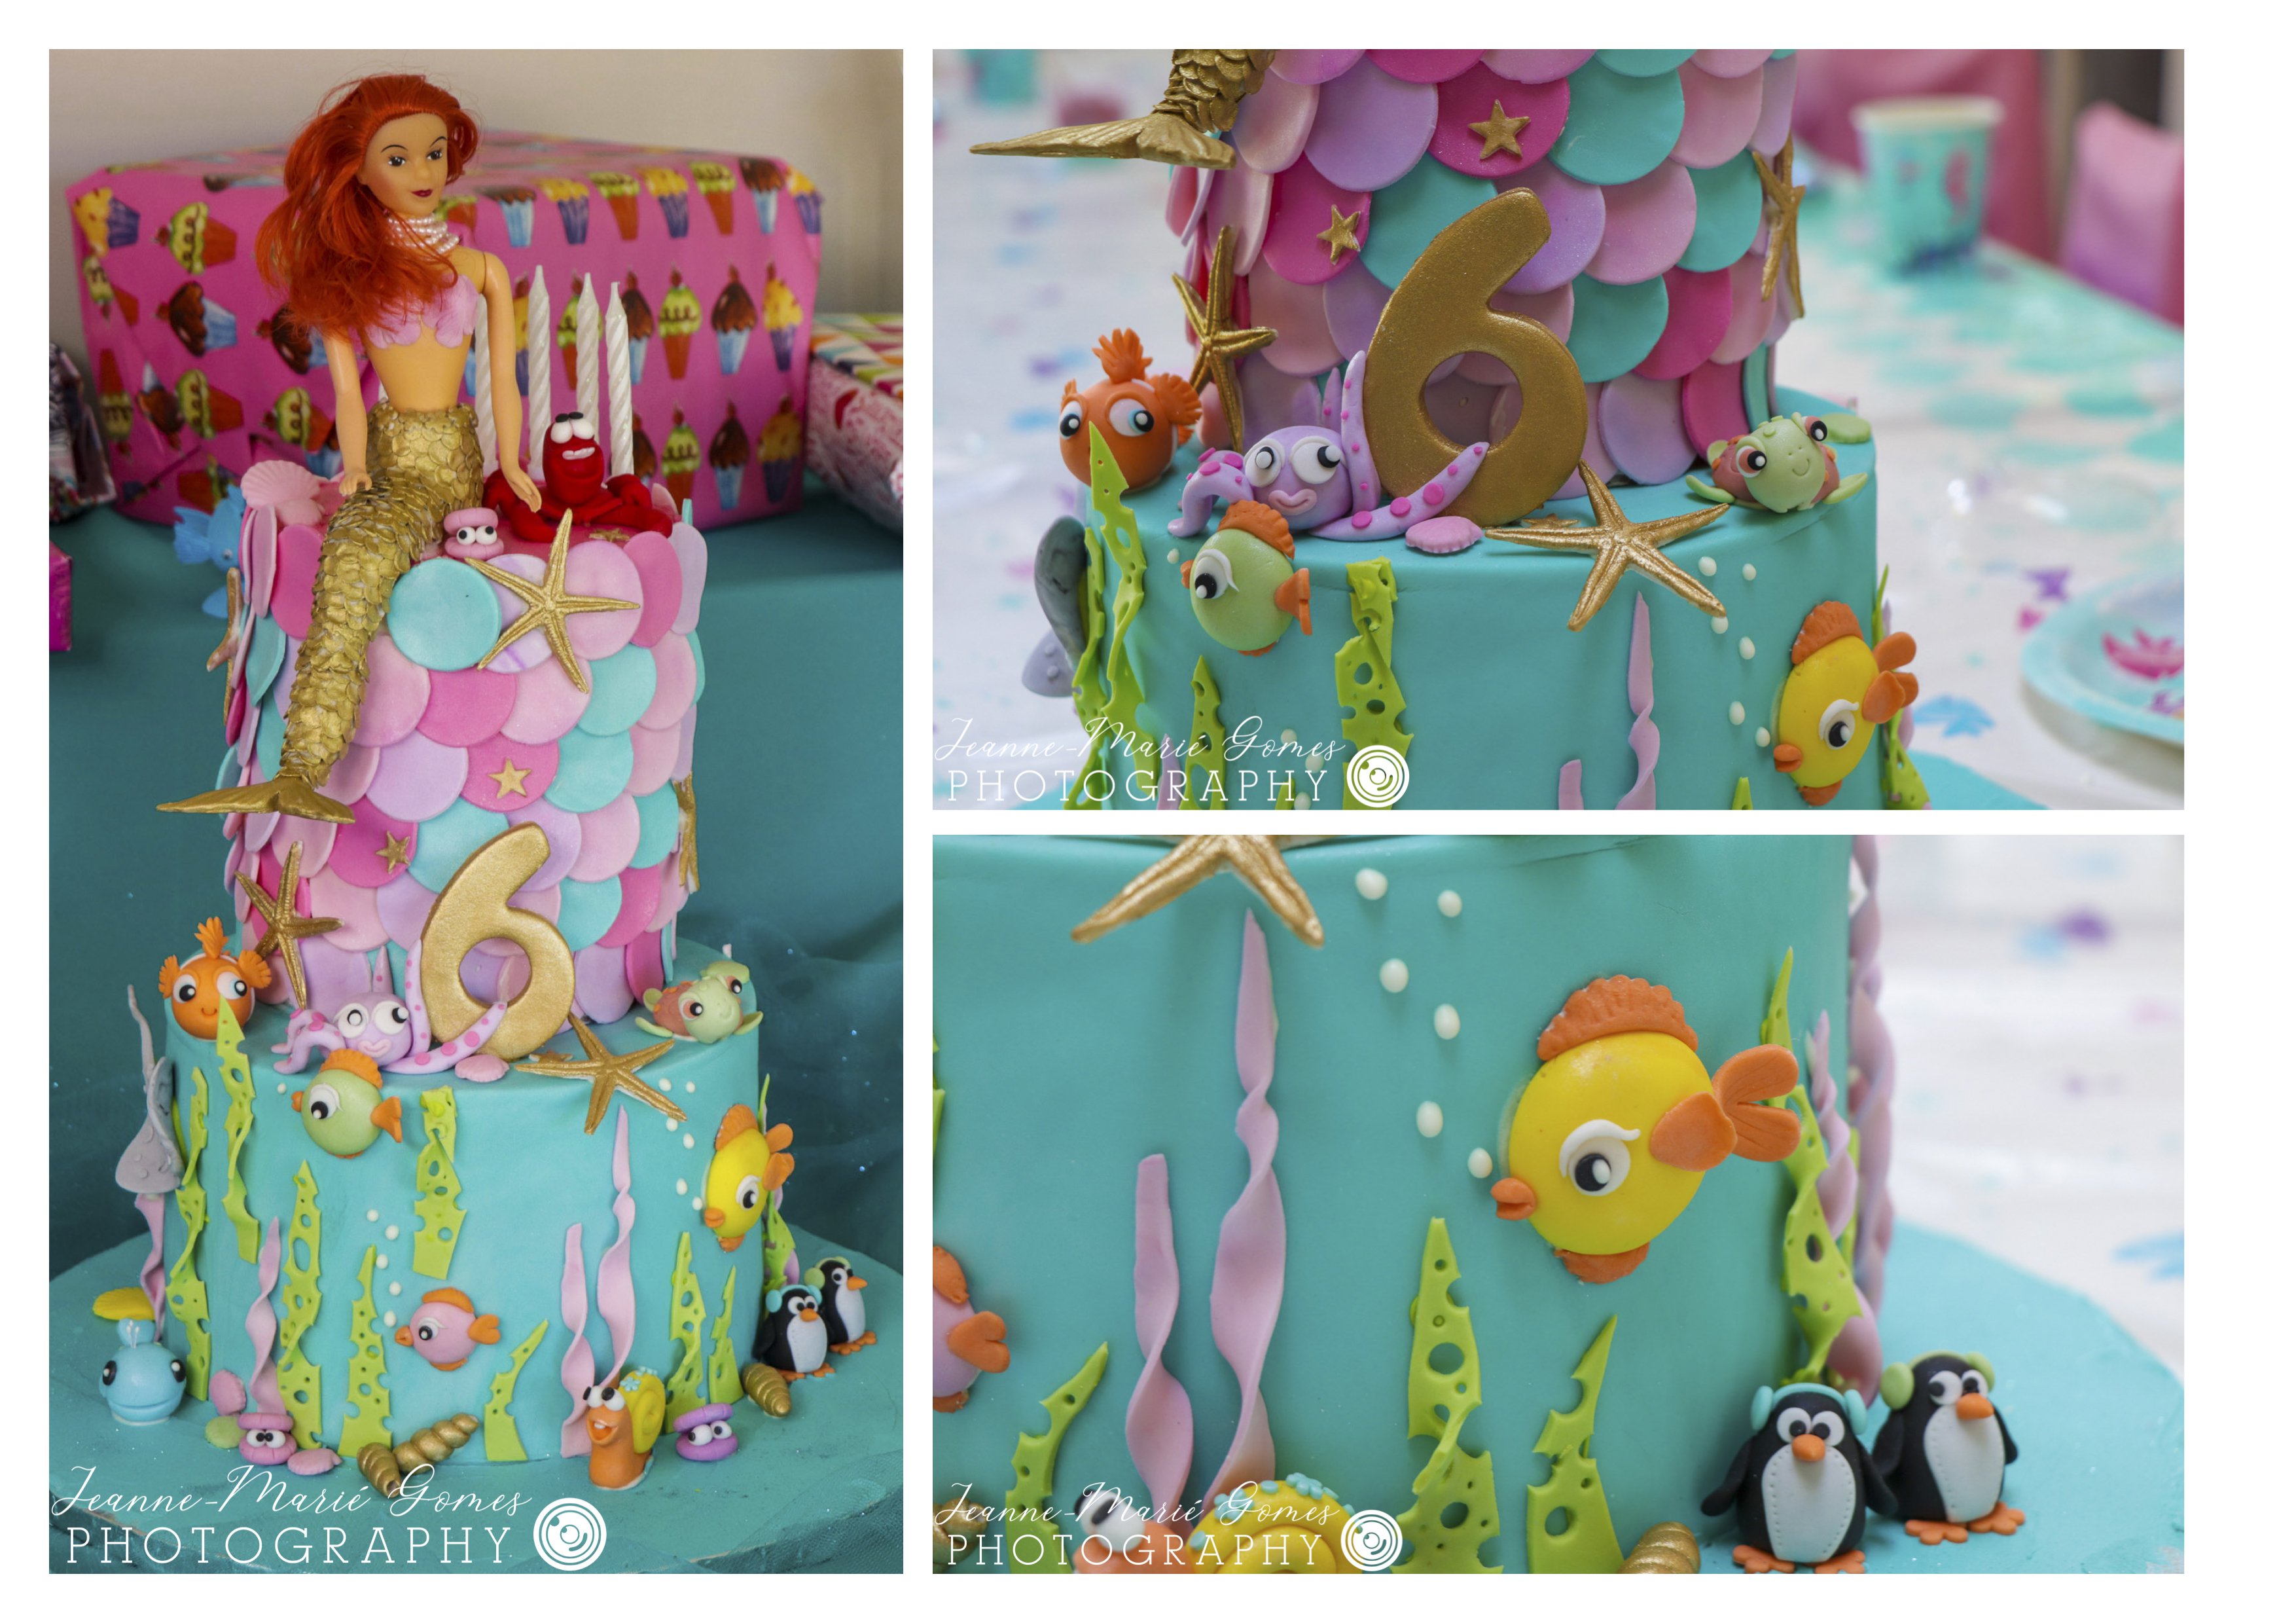 Mermaid Birthday Party captured by Jeanne-Marie Gomes Photography